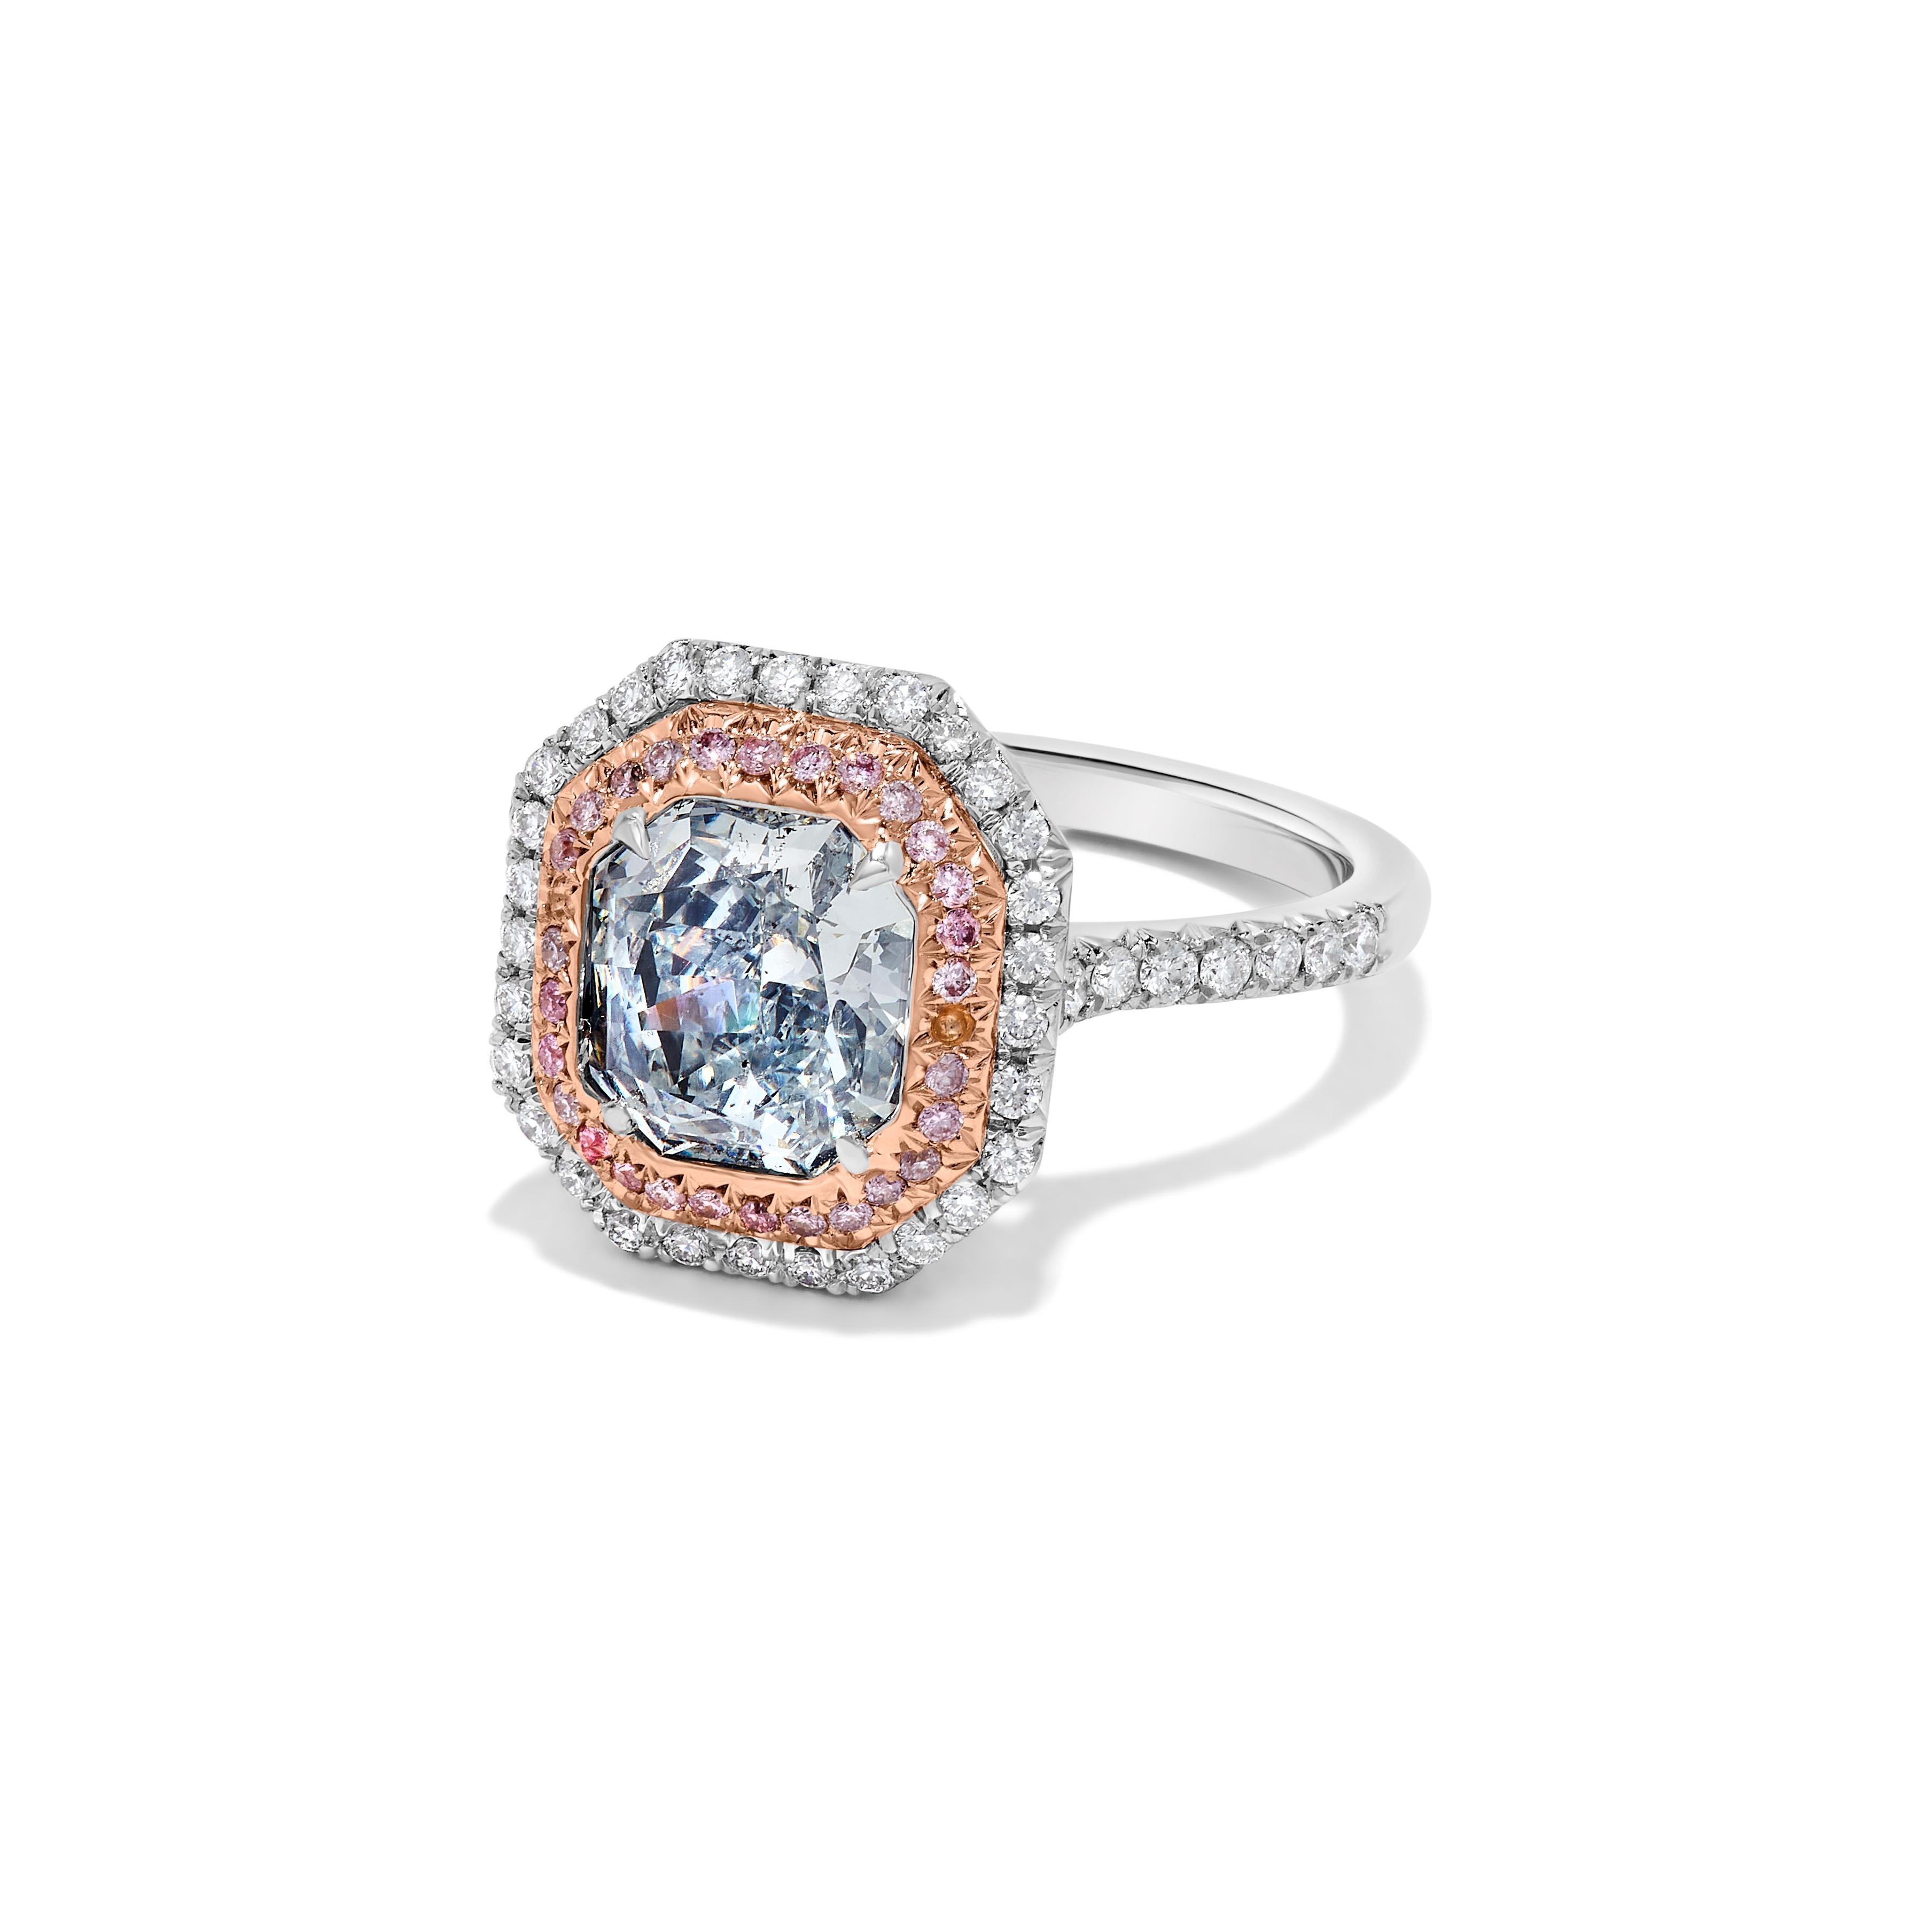 RareGemWorld's exquisite GIA certified diamond ring. Mounted in a beautiful 18K Gold and platinum setting with a natural radiant cut blue diamond. The blue diamond is surrounded by round natural pink diamond melee and round natural white diamond